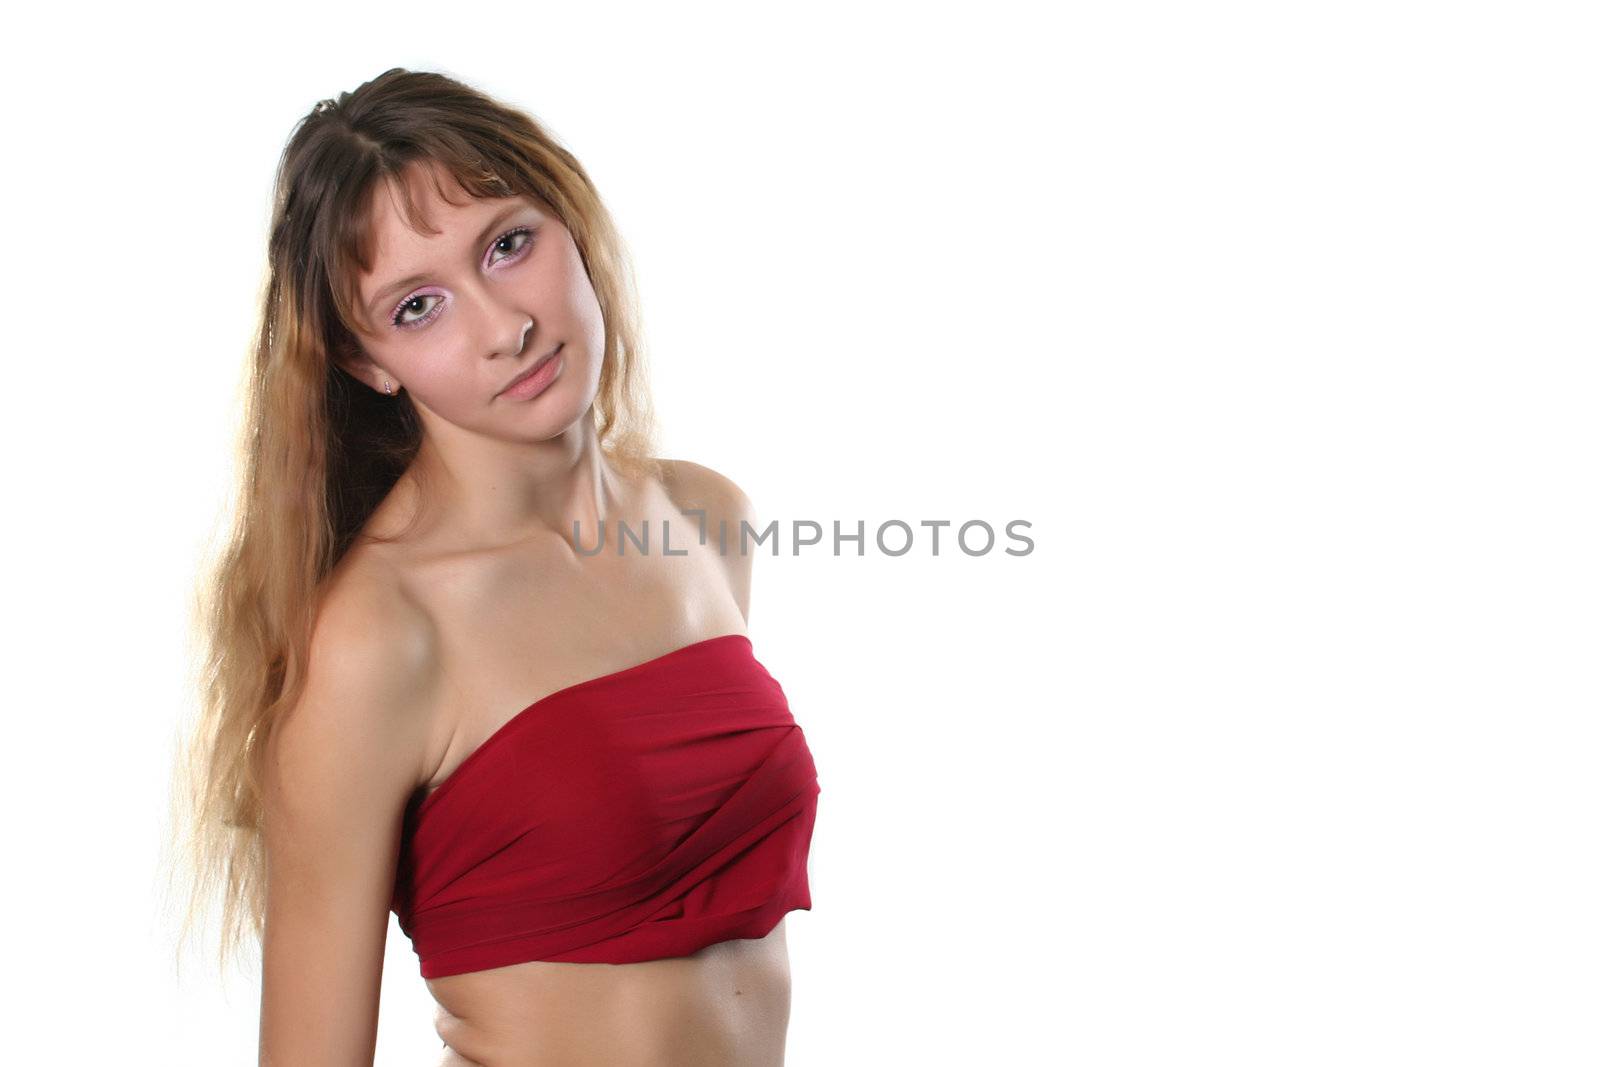 The naked attractive girl is covered by a red scarf